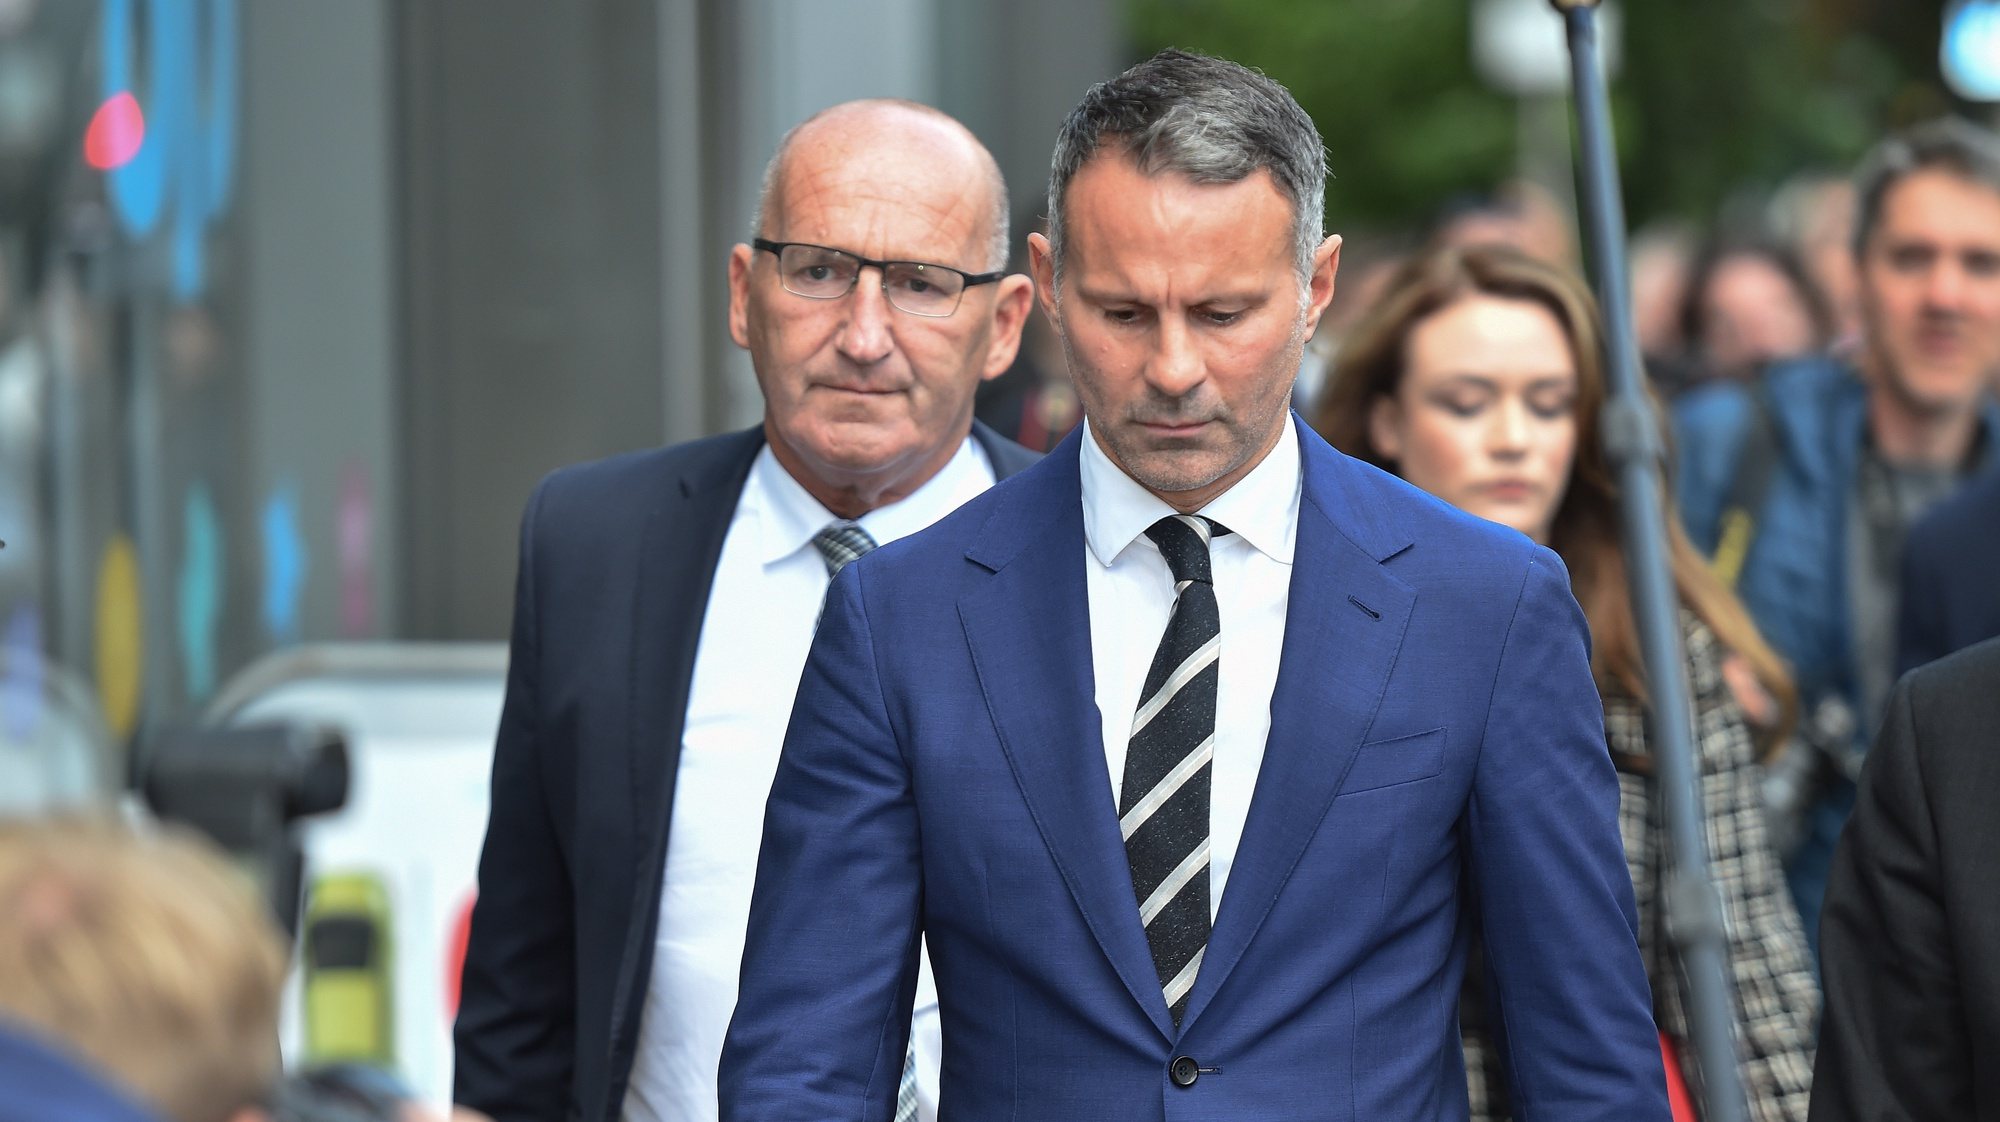 epa10150772 Former Welsh coach and Manchester United player Ryan Giggs leaves Manchester Crown Court, Manchester, Britain 31 August 2022. Giggs is facing a potential retrial after the jury failed to reach a verdict in his domestic violence trial.  EPA/STRINGER